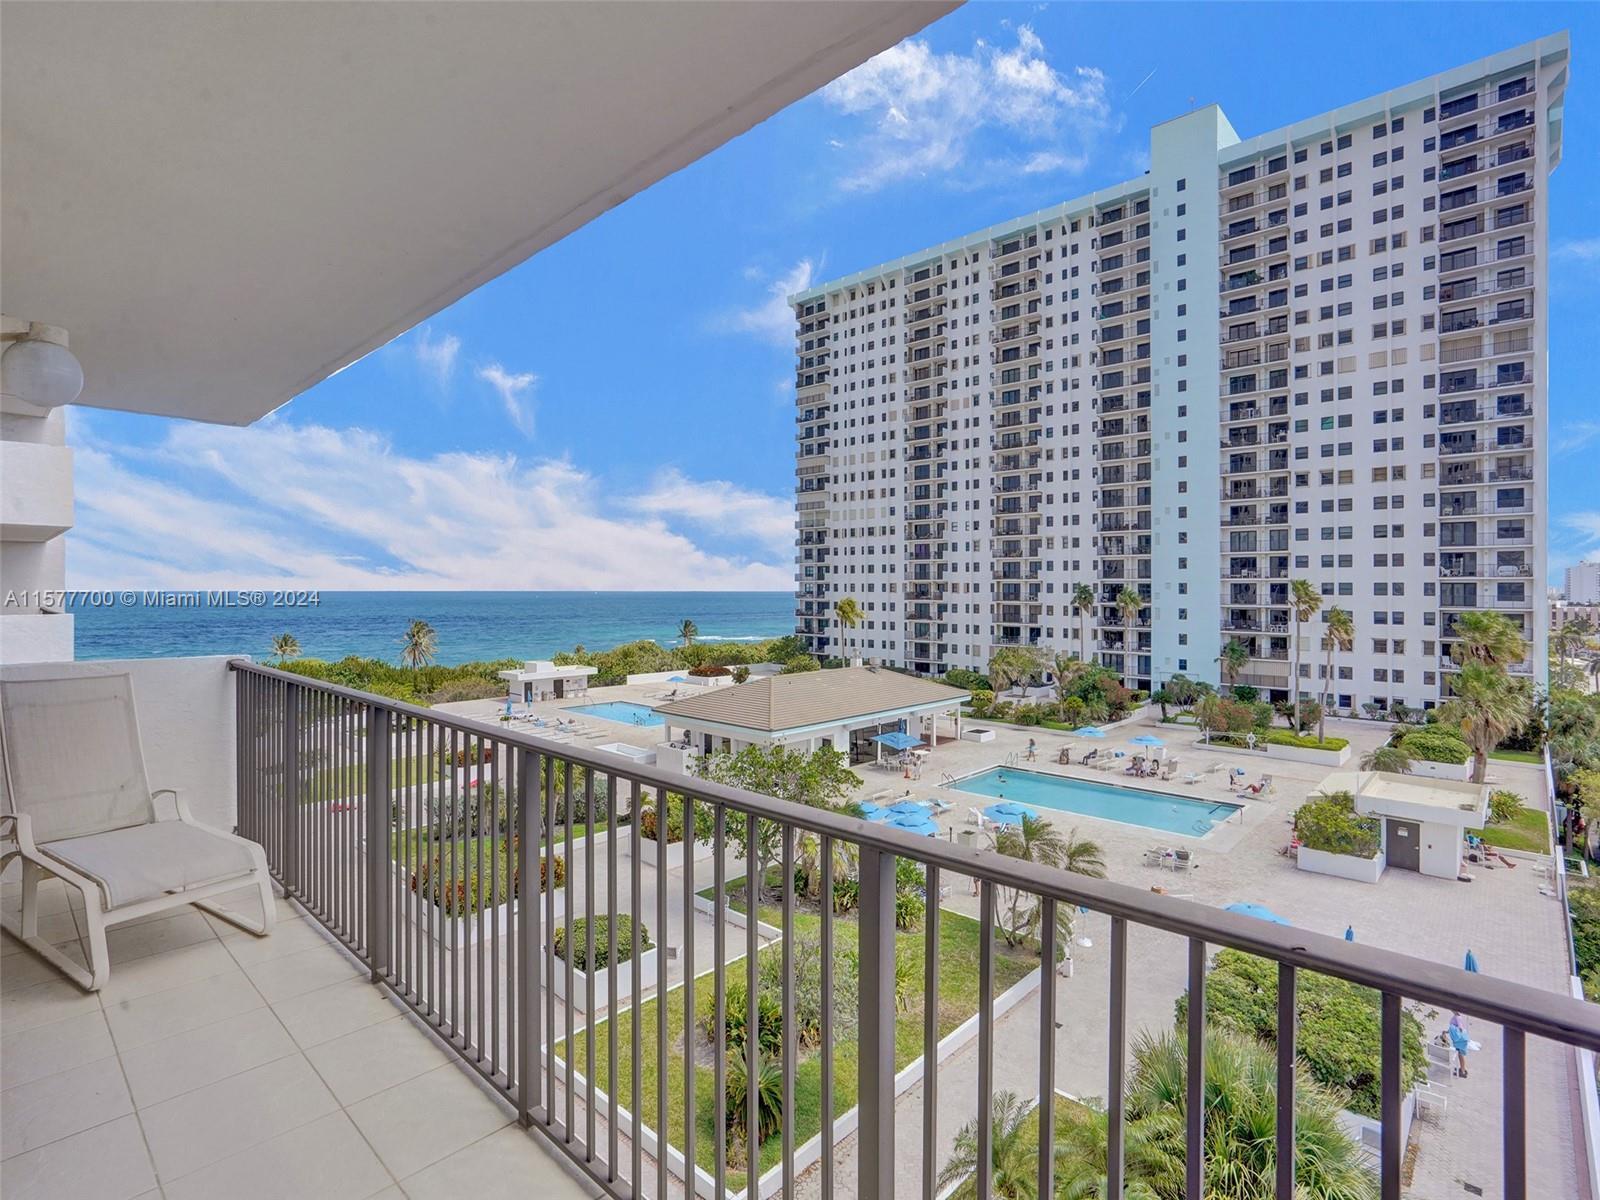 ENJOY POOL, OCEAN AND INTRACOASTAL VIEWS FROM THIS LIGHT, BRIGHT AND AIRY UNIT. CORNER UNIT FEATURES